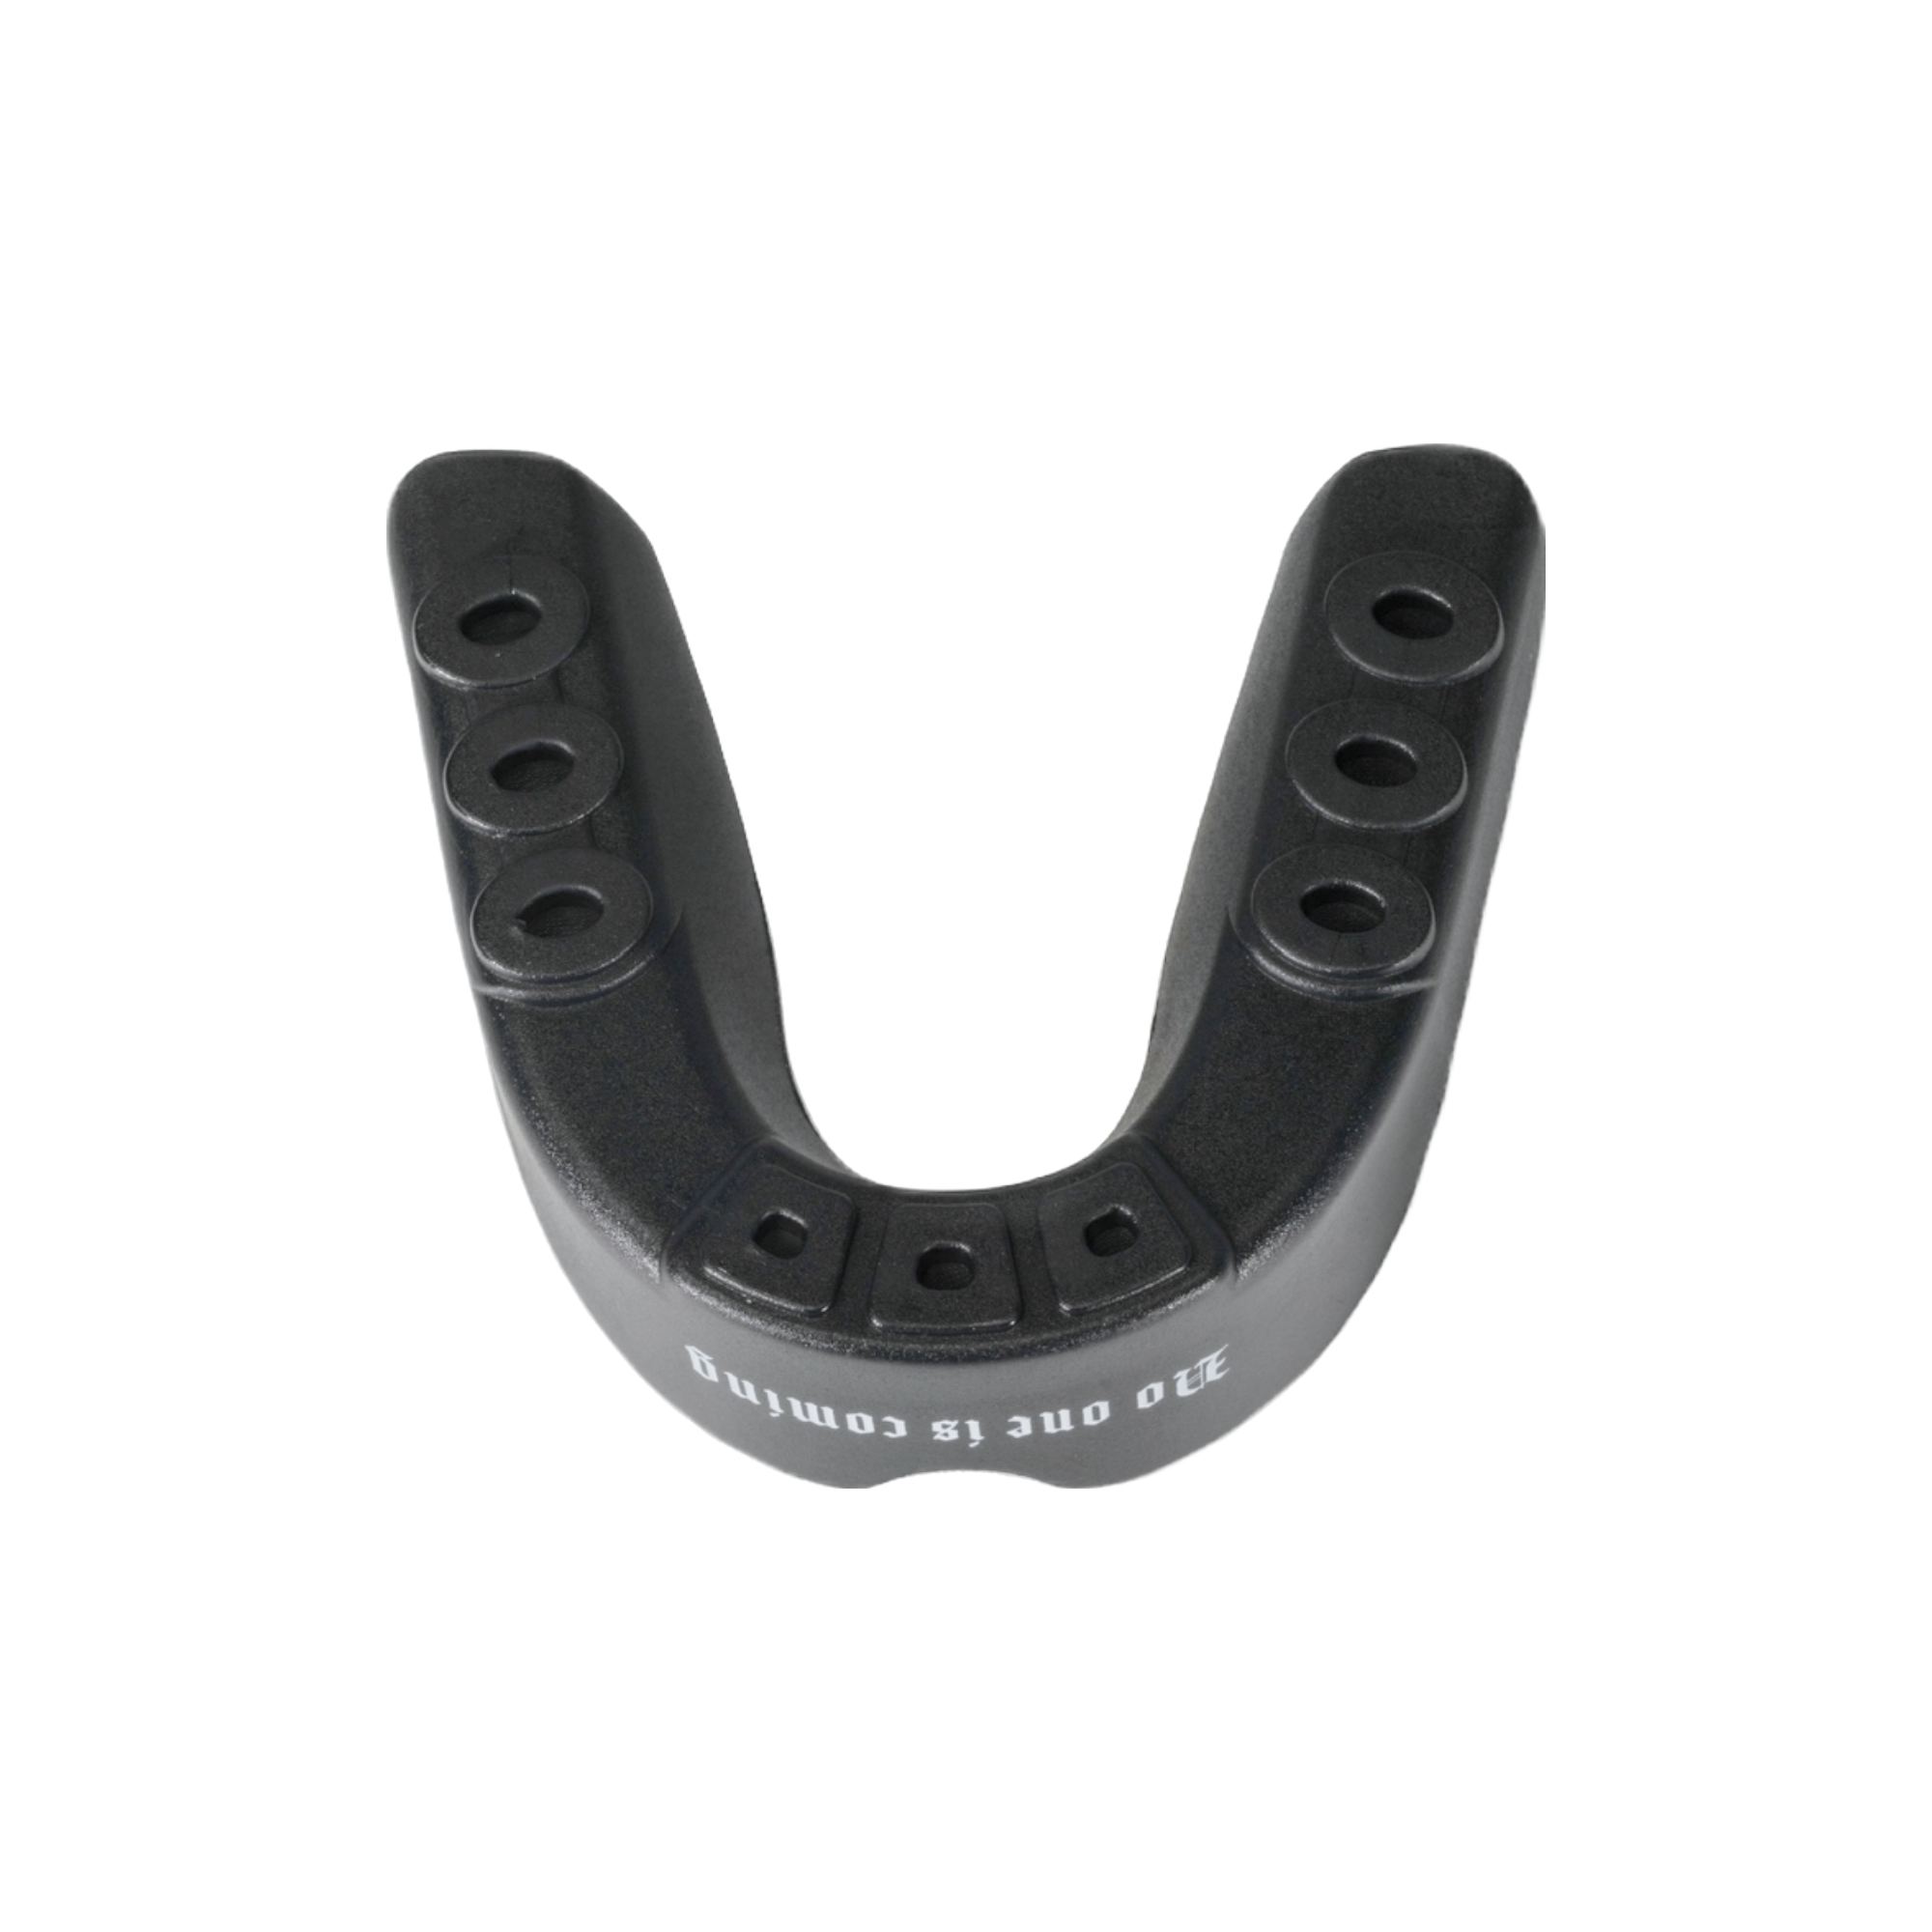 Full Contact Mouth Guard